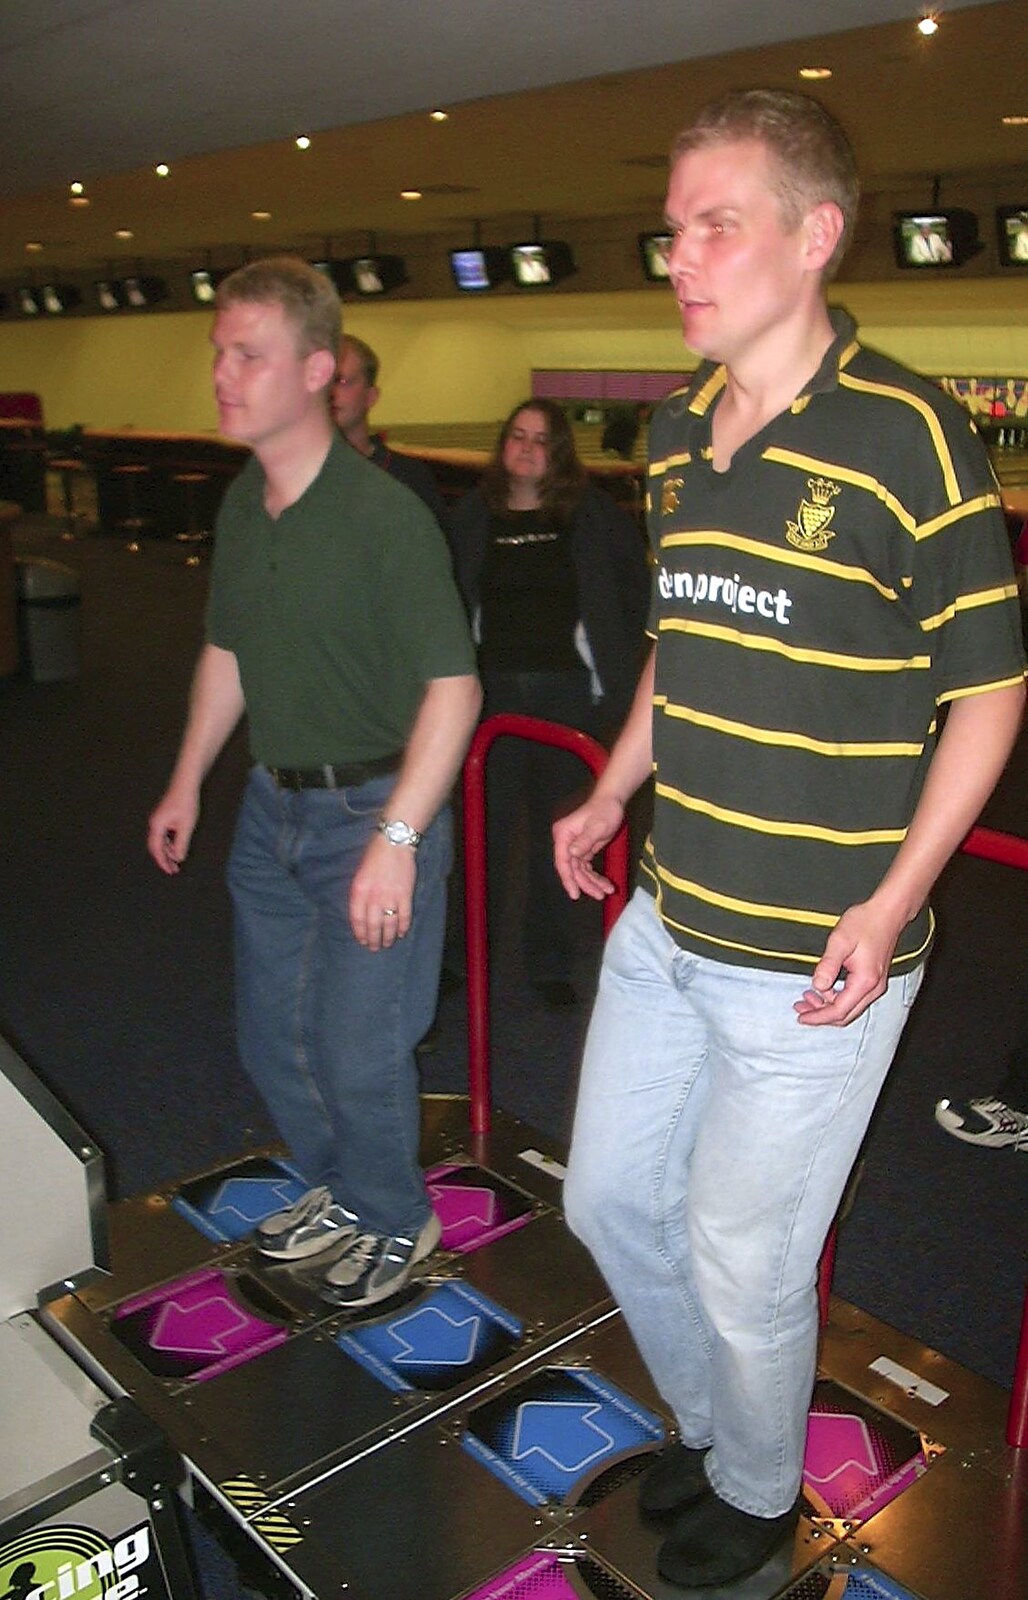 BSCC Bike Rides and Ten-Pin Bowling, Thornham and Norwich - 18th September 2004: Mikey and Bill do the dancing game